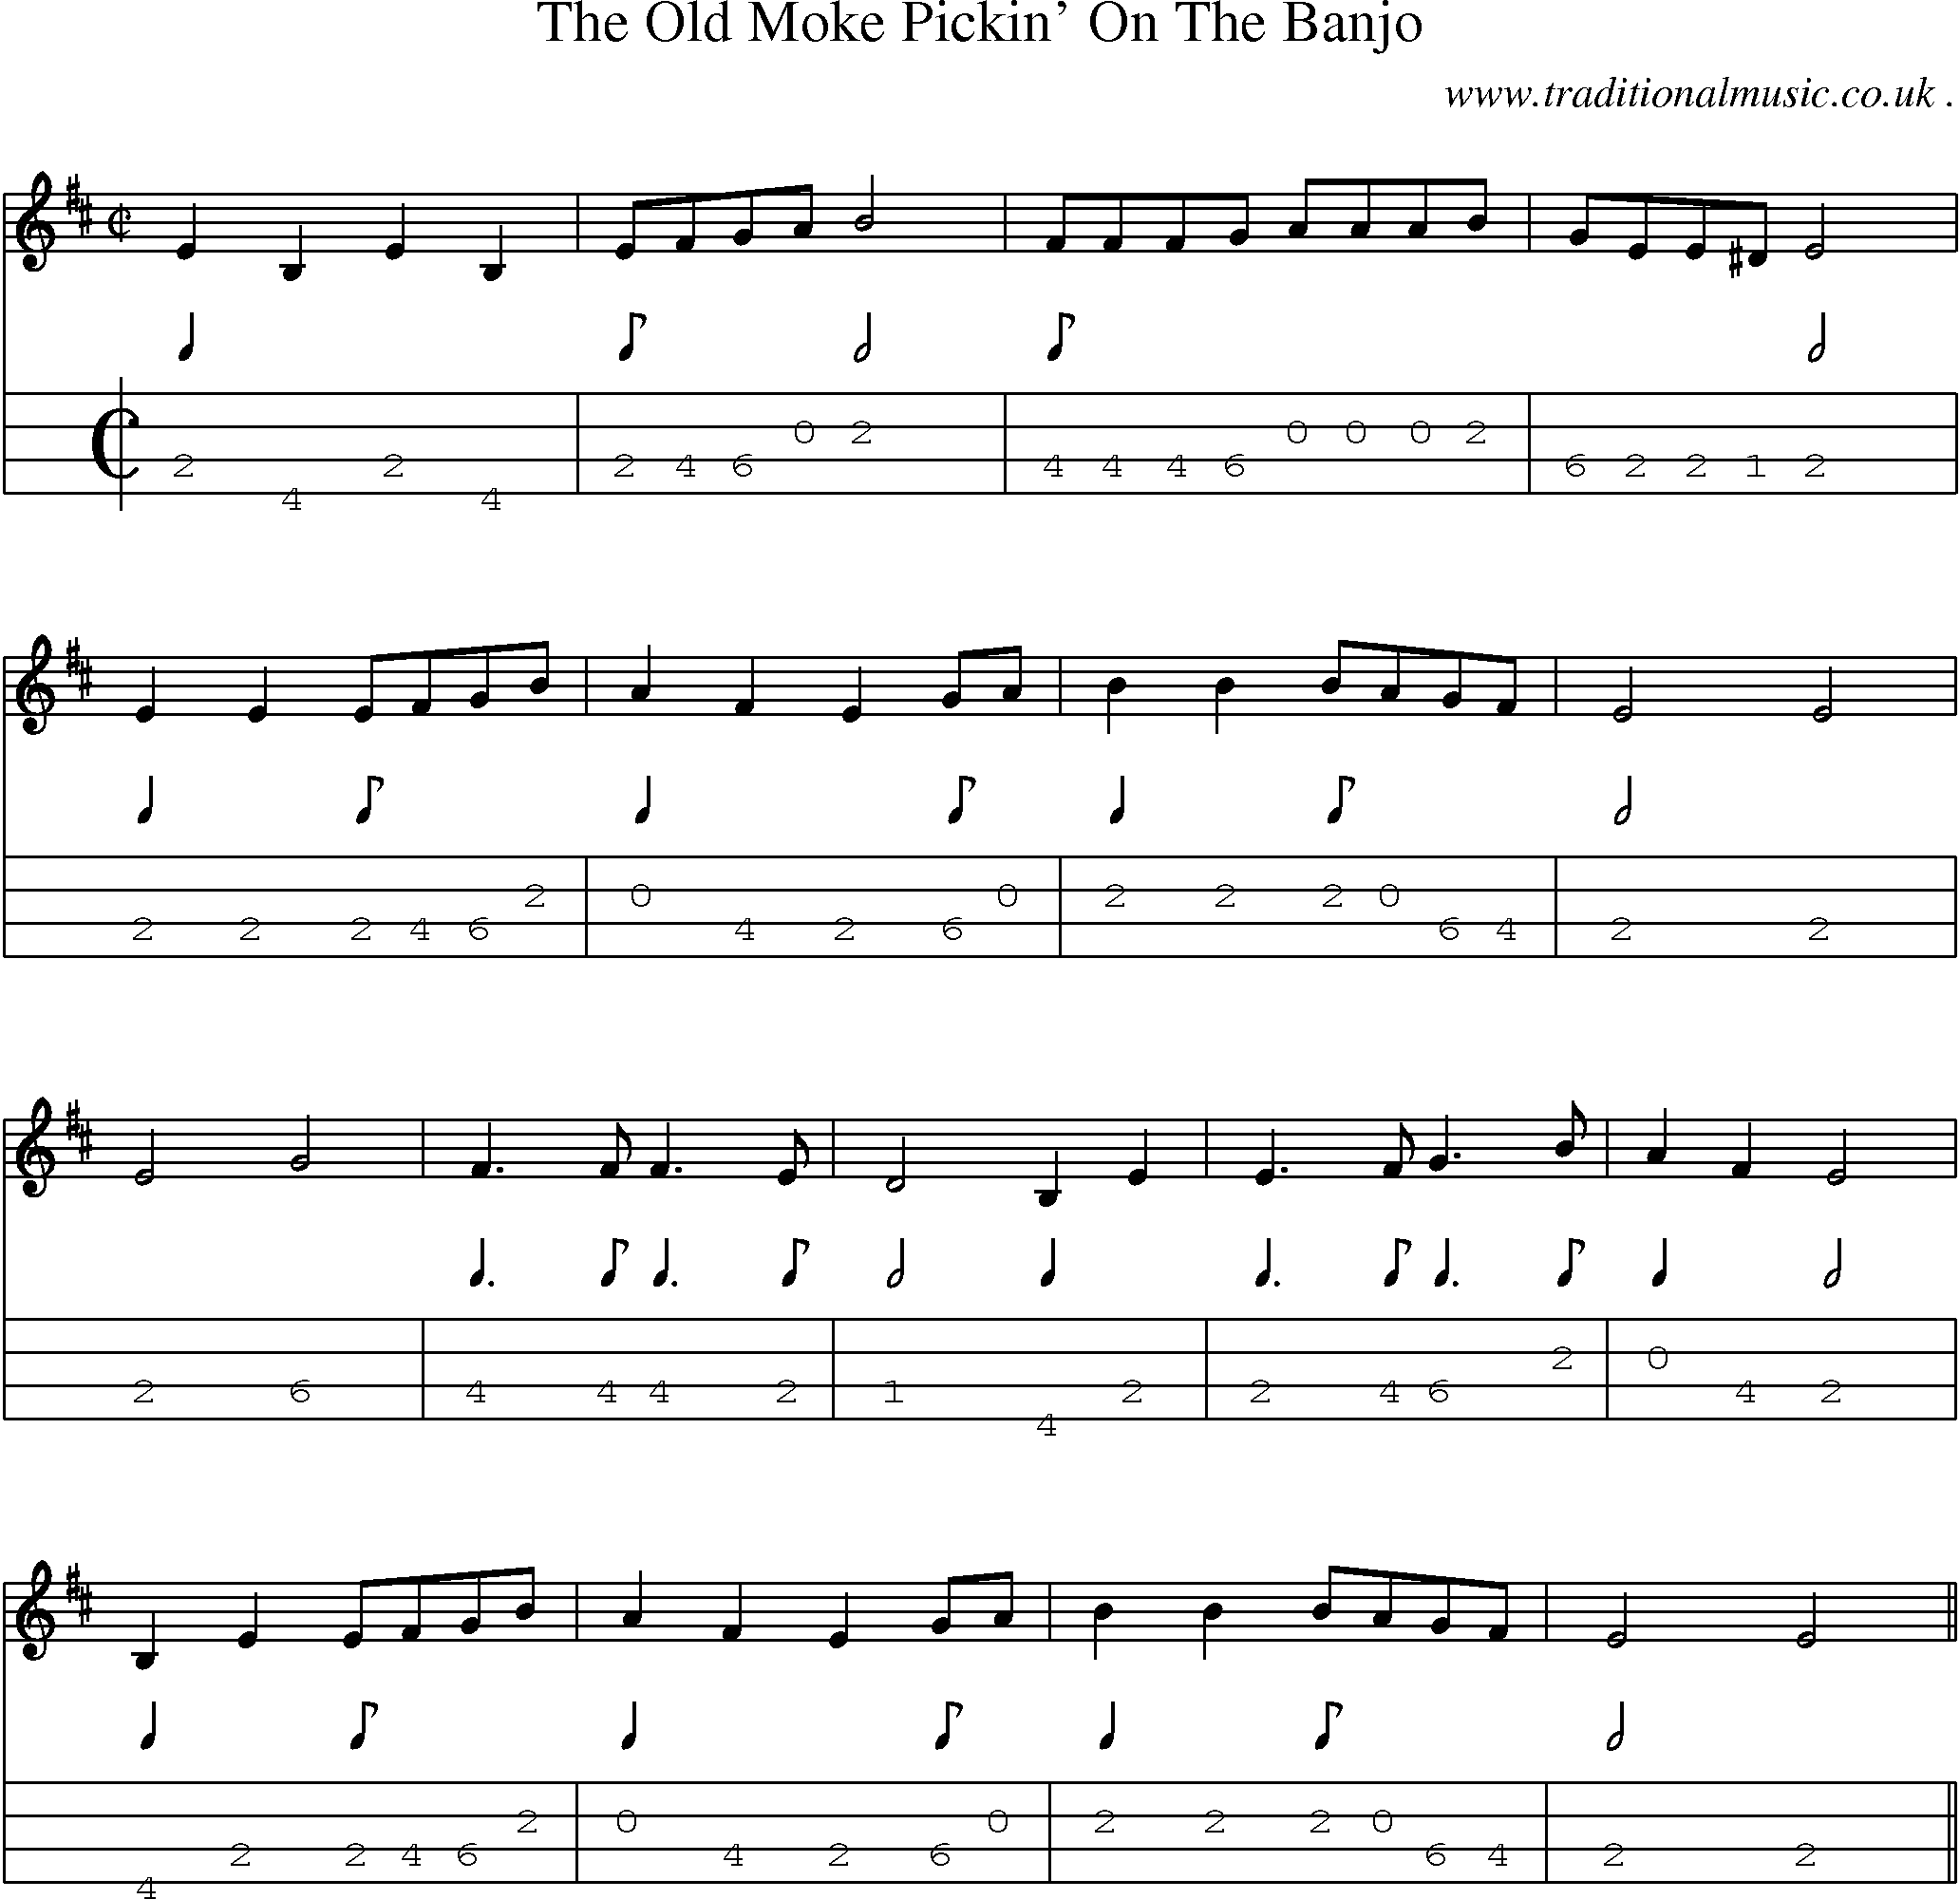 Sheet-Music and Mandolin Tabs for The Old Moke Pickin On The Banjo